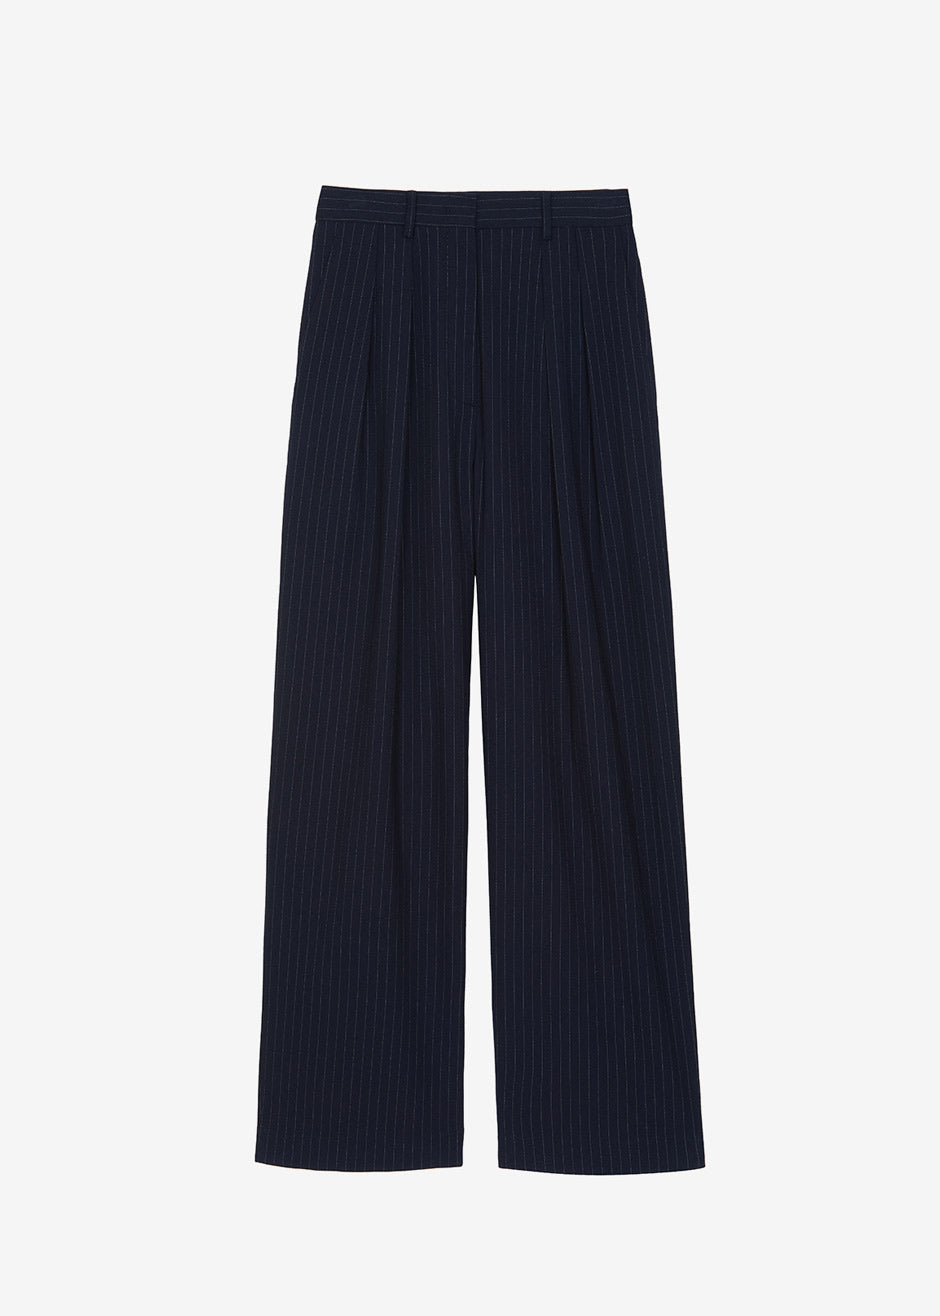 Tansy Pleated Trousers - Navy Pinstripe - 11